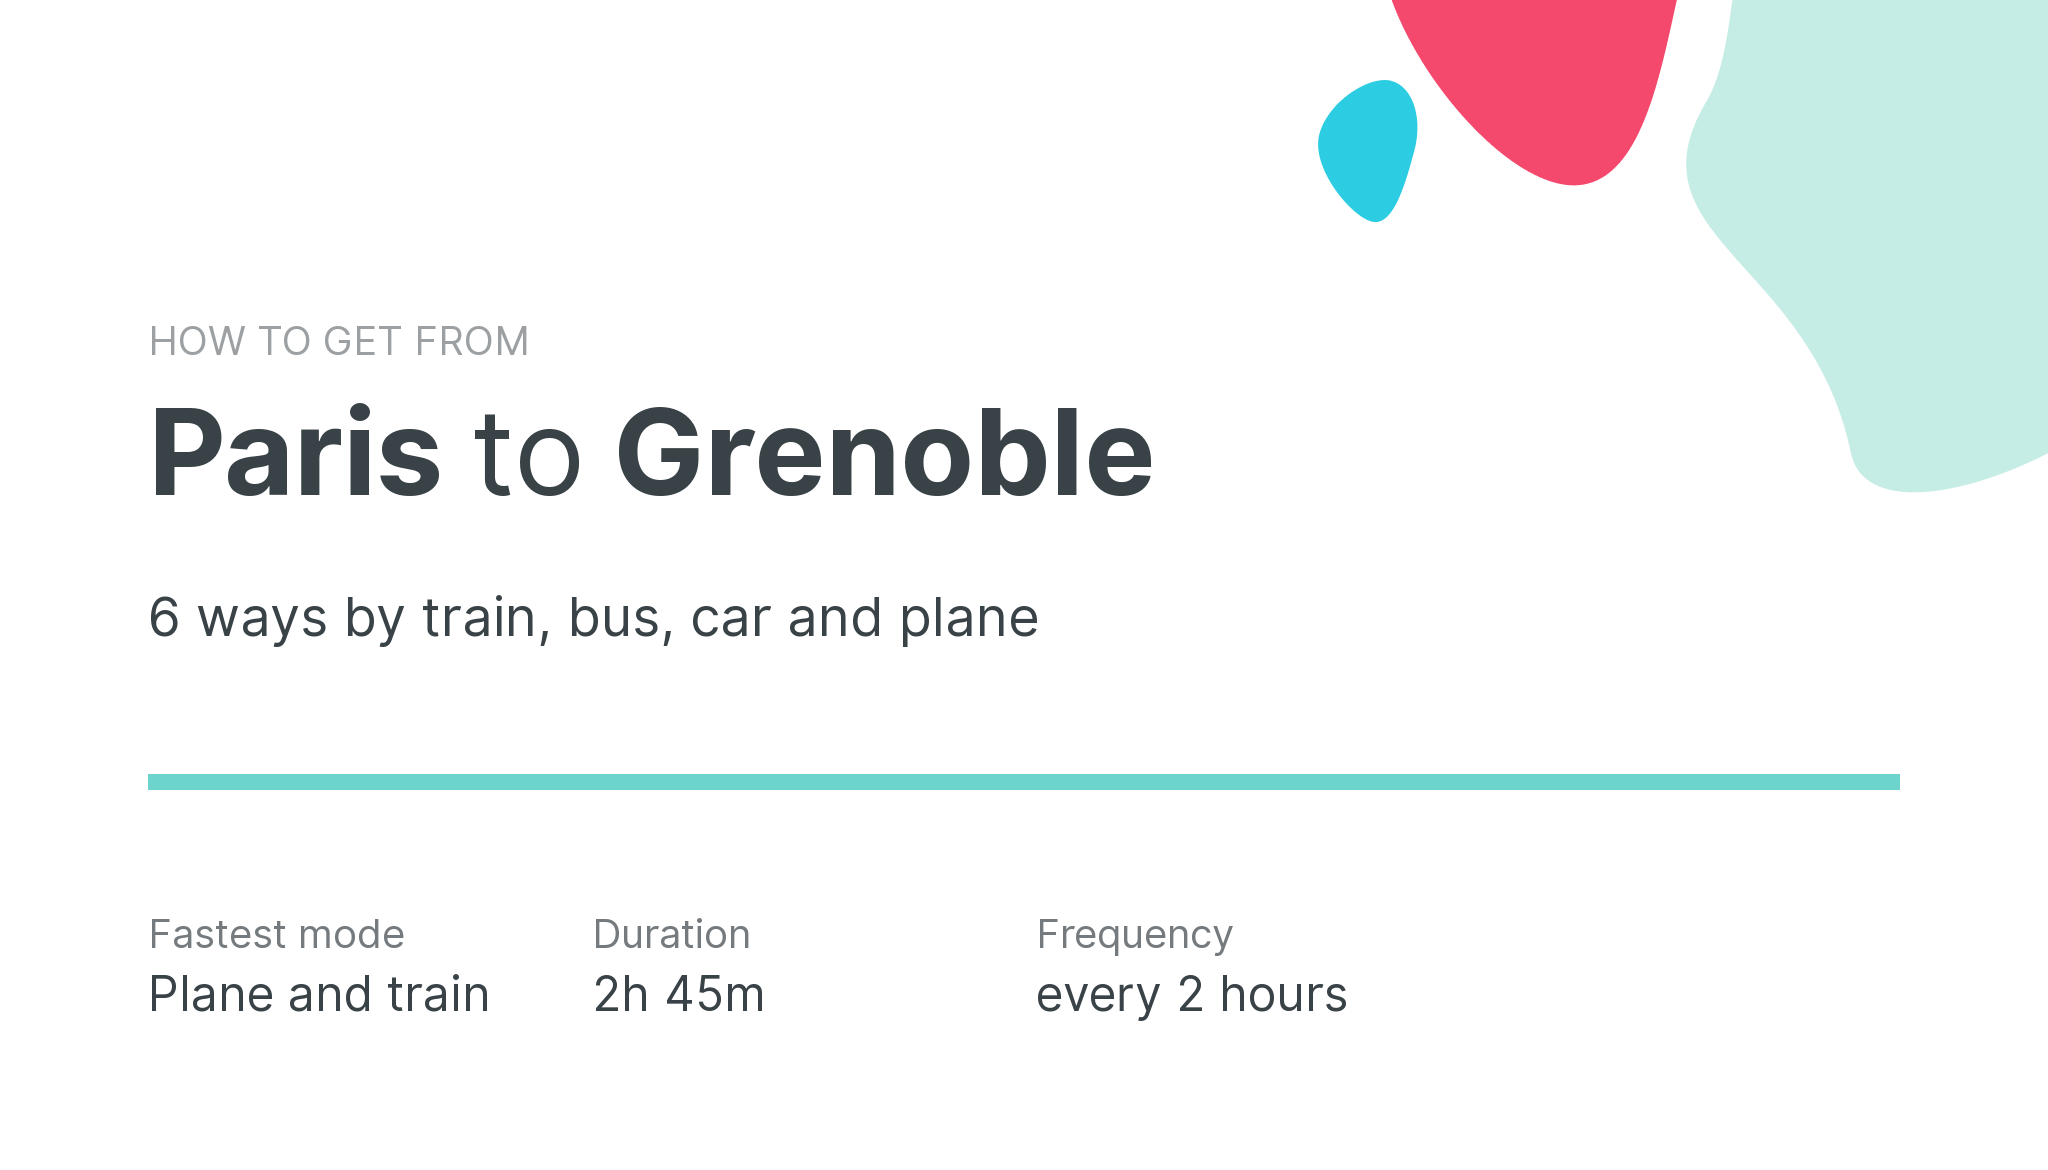 How do I get from Paris to Grenoble